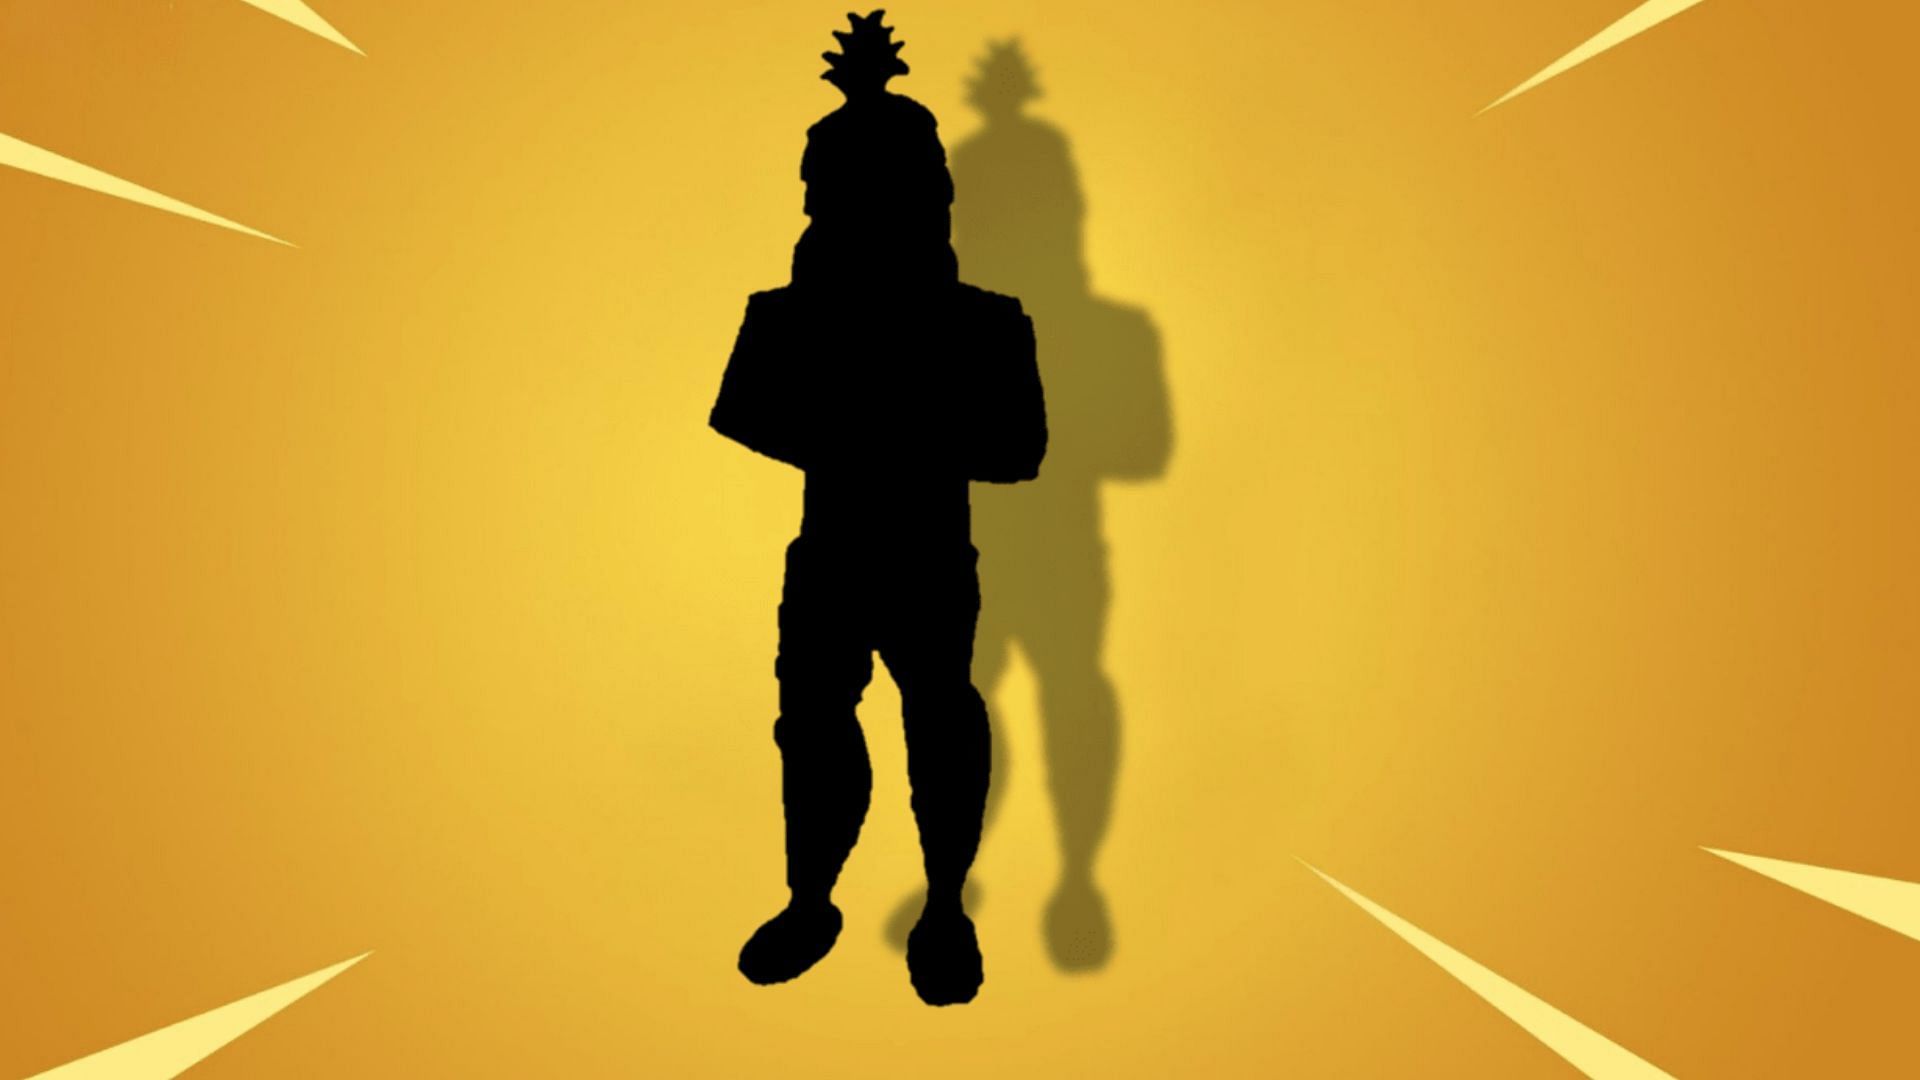 A new Fortnite skin concept is turning a lot of heads online, and it is based on a Tree Warrior from the island (Image via Fortnite Insider)